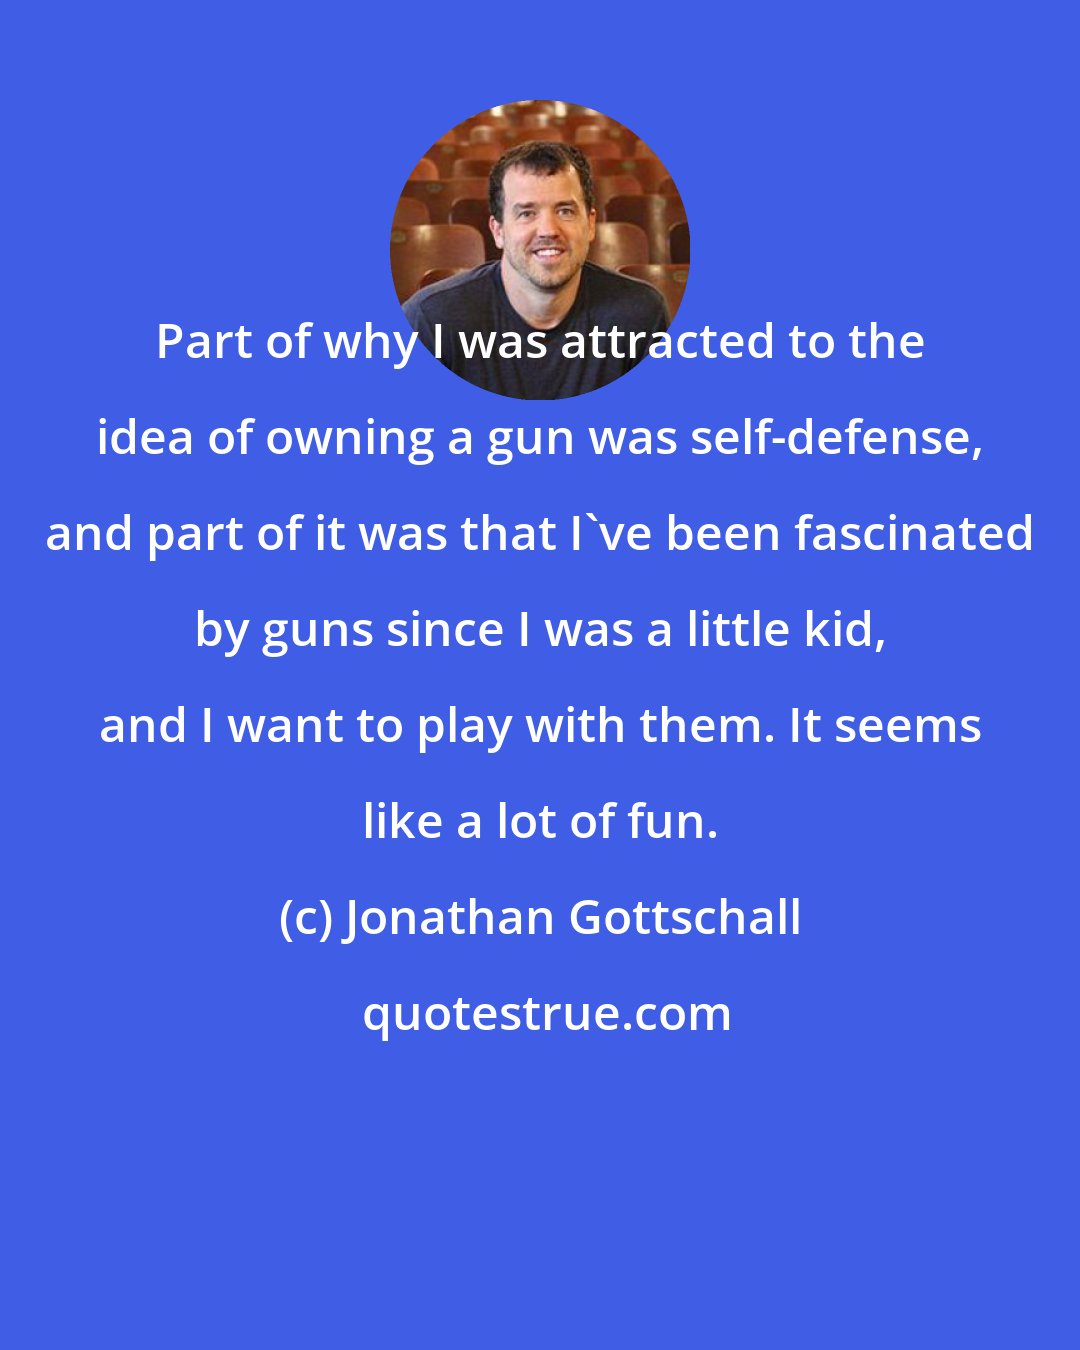 Jonathan Gottschall: Part of why I was attracted to the idea of owning a gun was self-defense, and part of it was that I've been fascinated by guns since I was a little kid, and I want to play with them. It seems like a lot of fun.